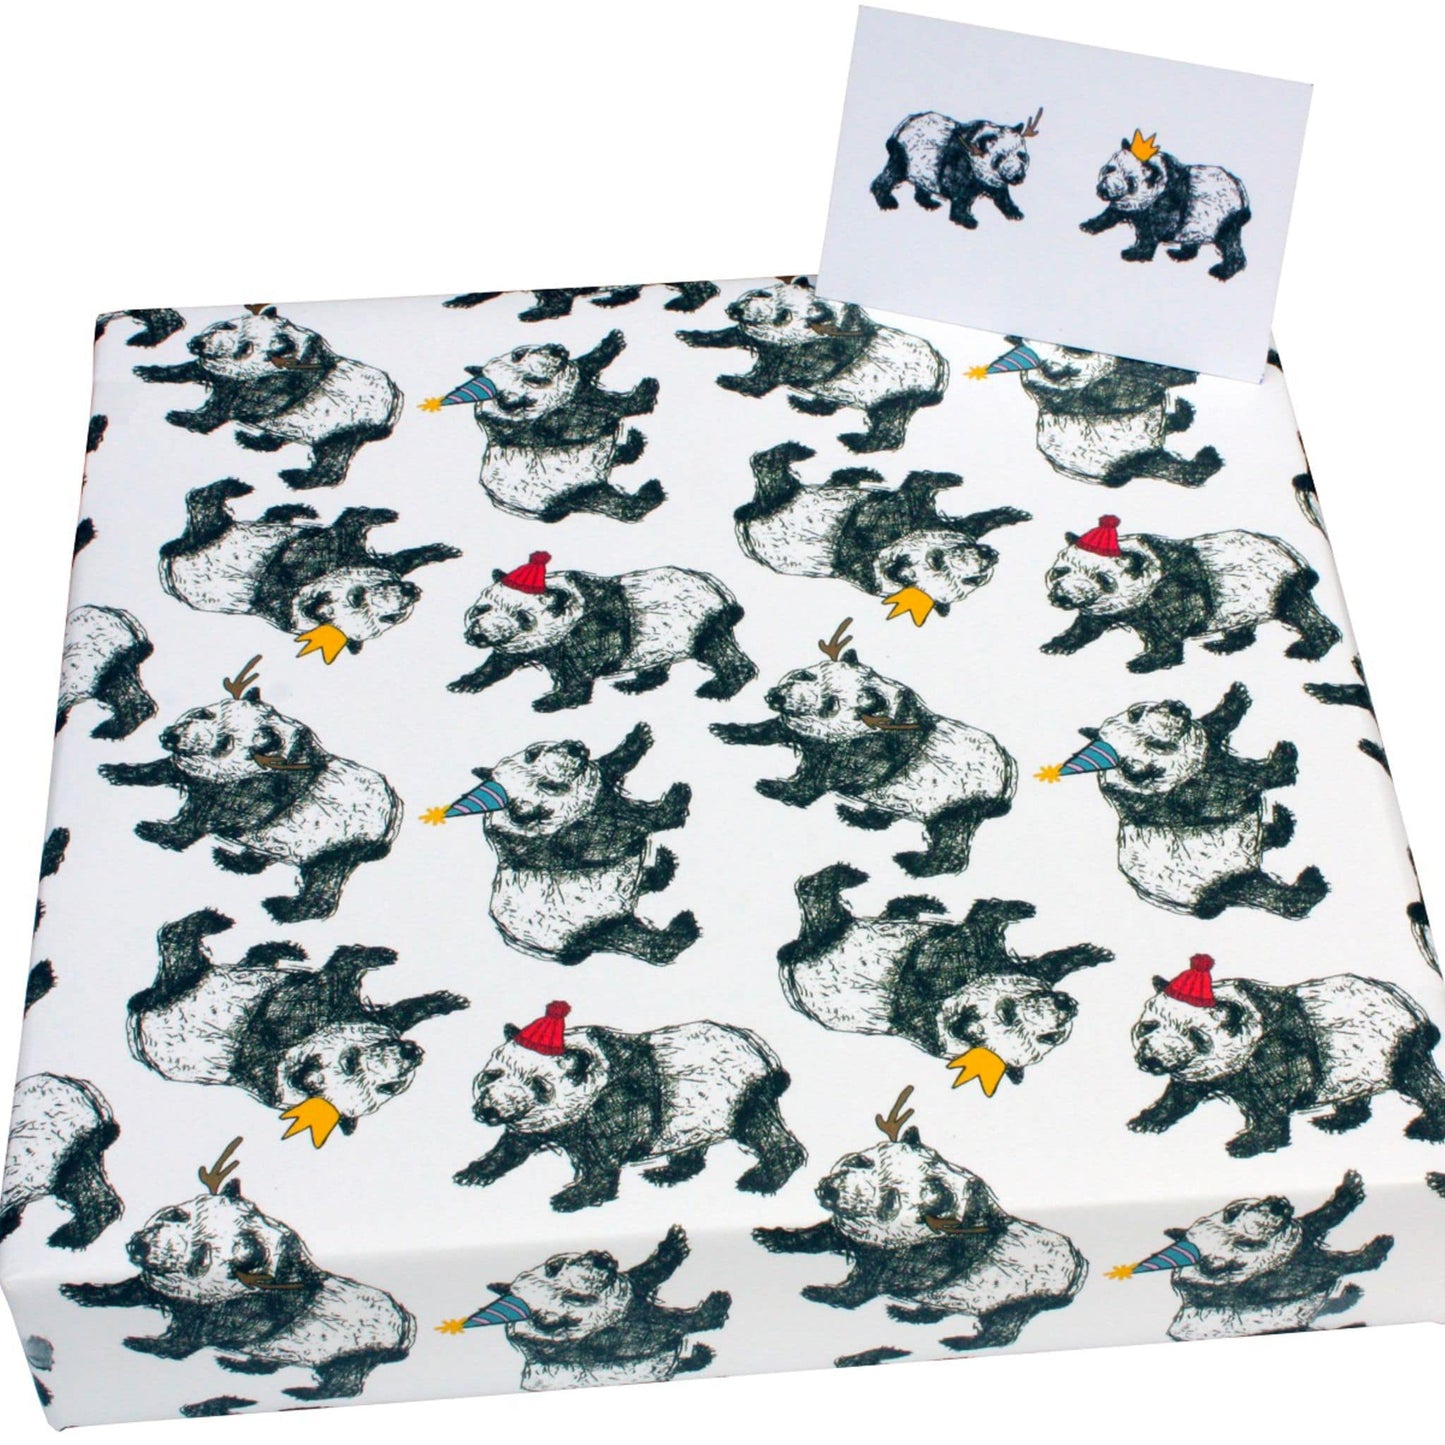 Recycled Christmas wrapping paper - pandas and hats